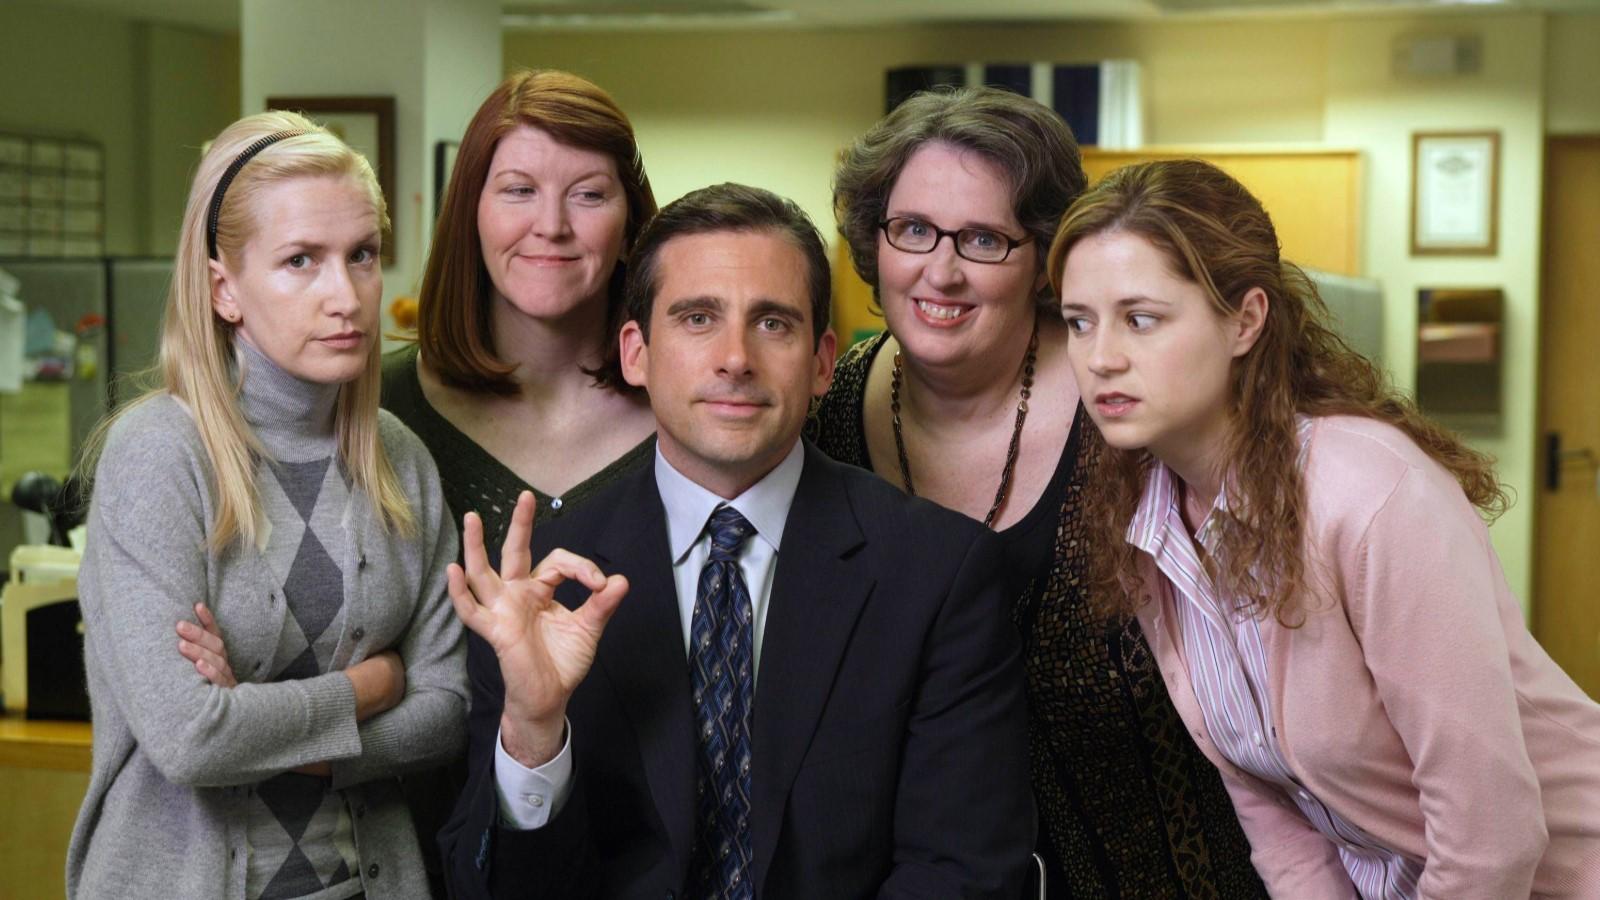 Angela, Meredith, Michael, Phillis, and Pam in The Office